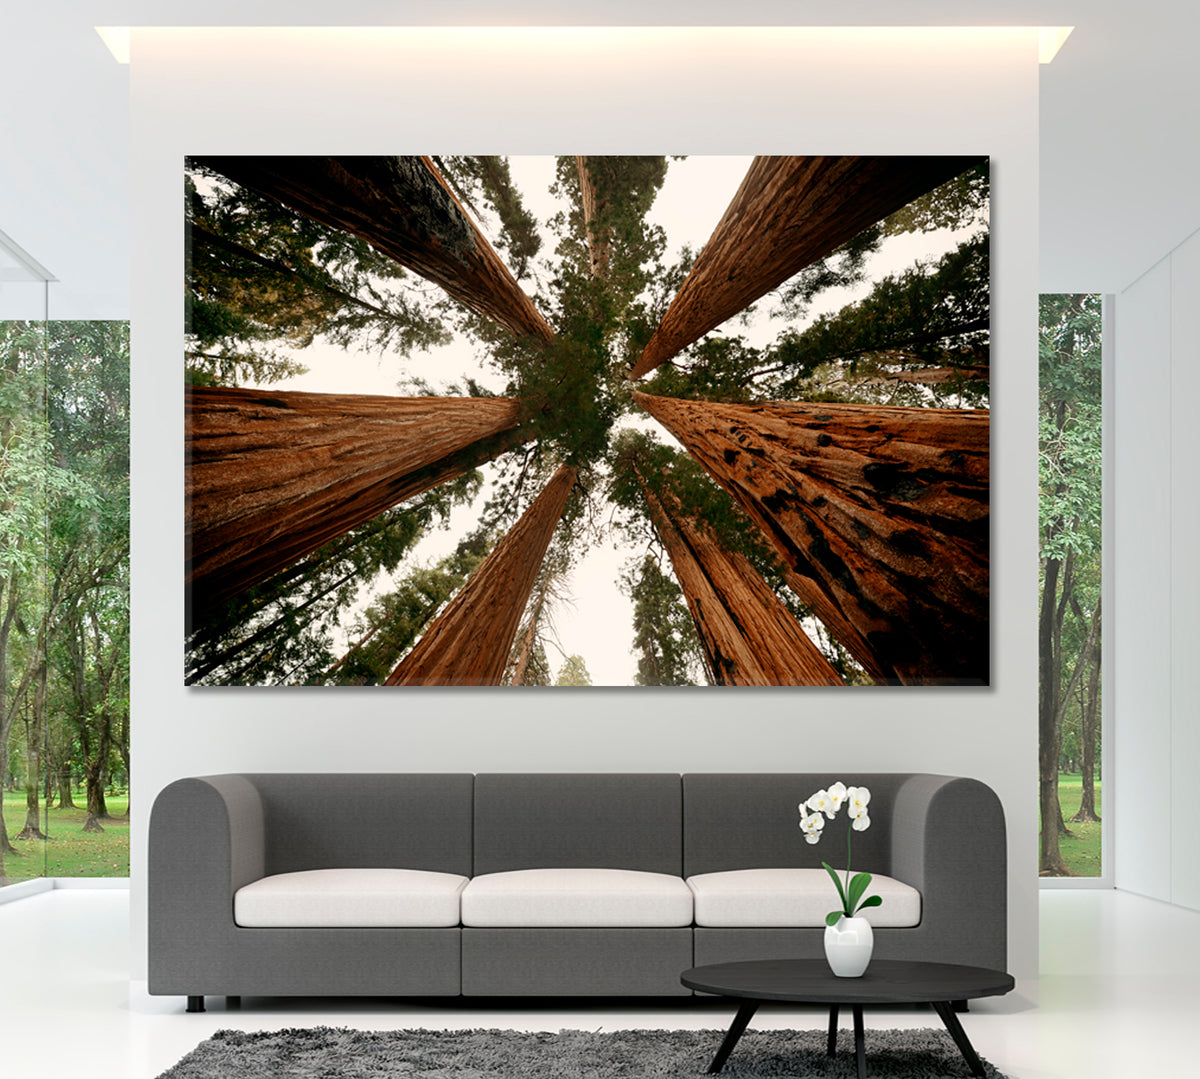 TREES Sequoia and Kings National Park Nature Scenery Nature Wall Canvas Print Artesty 1 panel 24" x 16" 